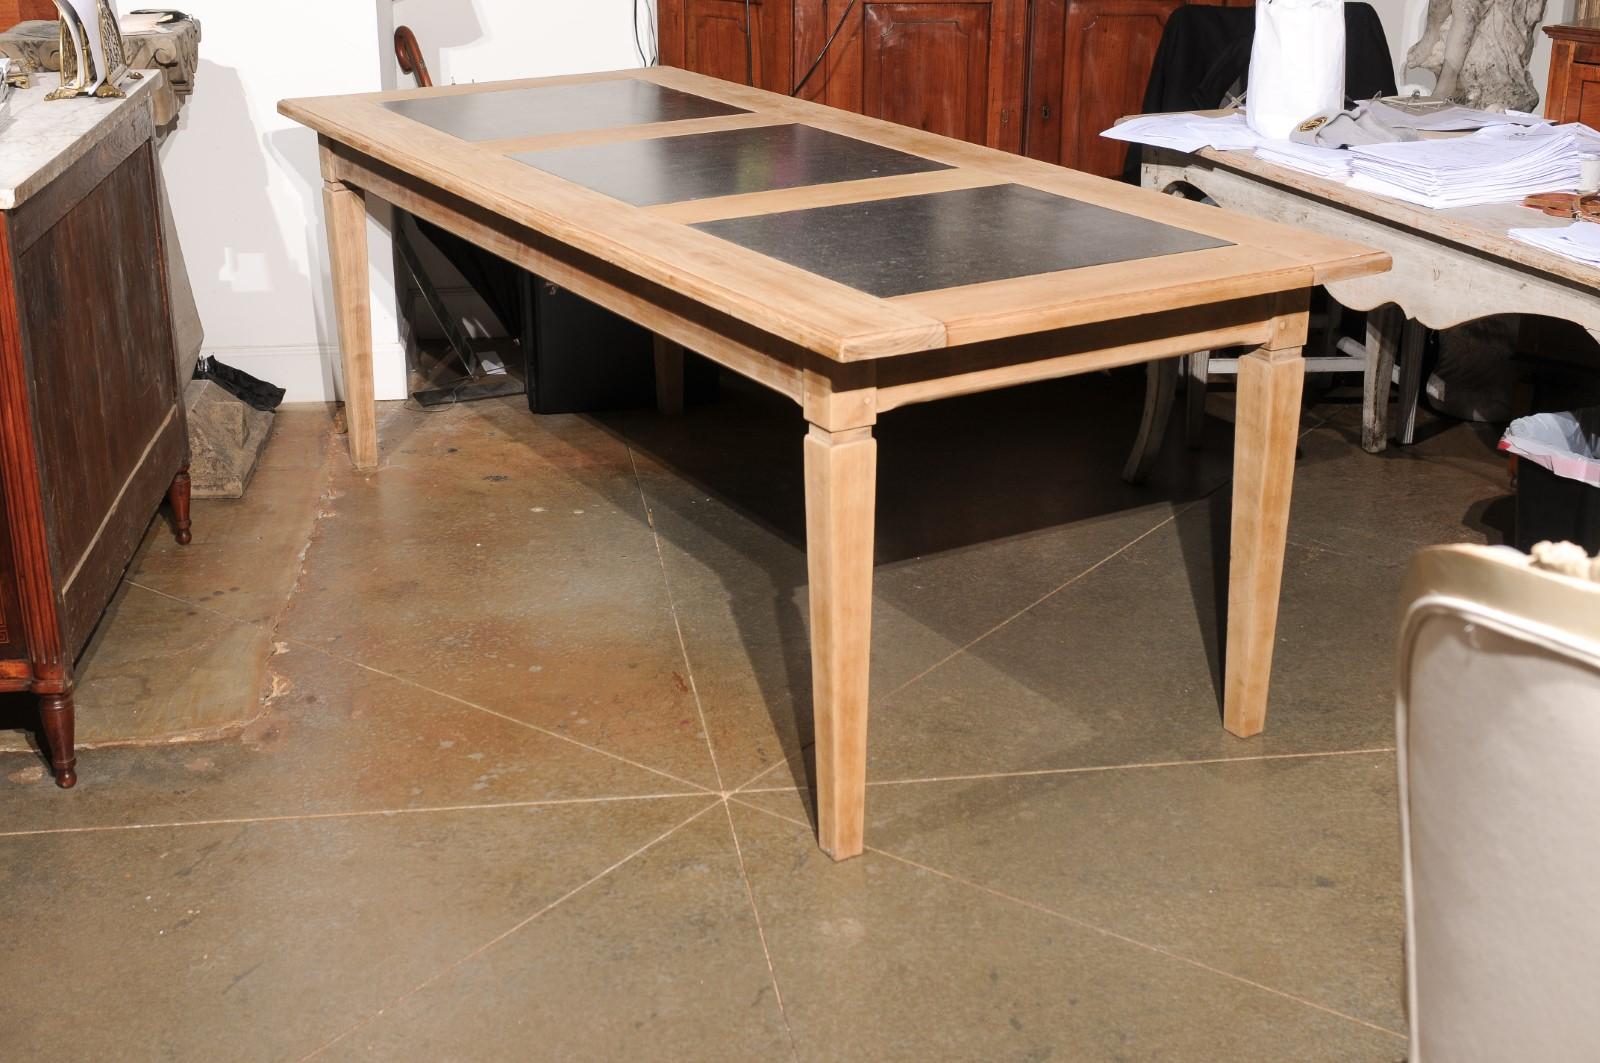 Southern French Midcentury Natural Oak Dining Table with Fossil Black Marble Top For Sale 5